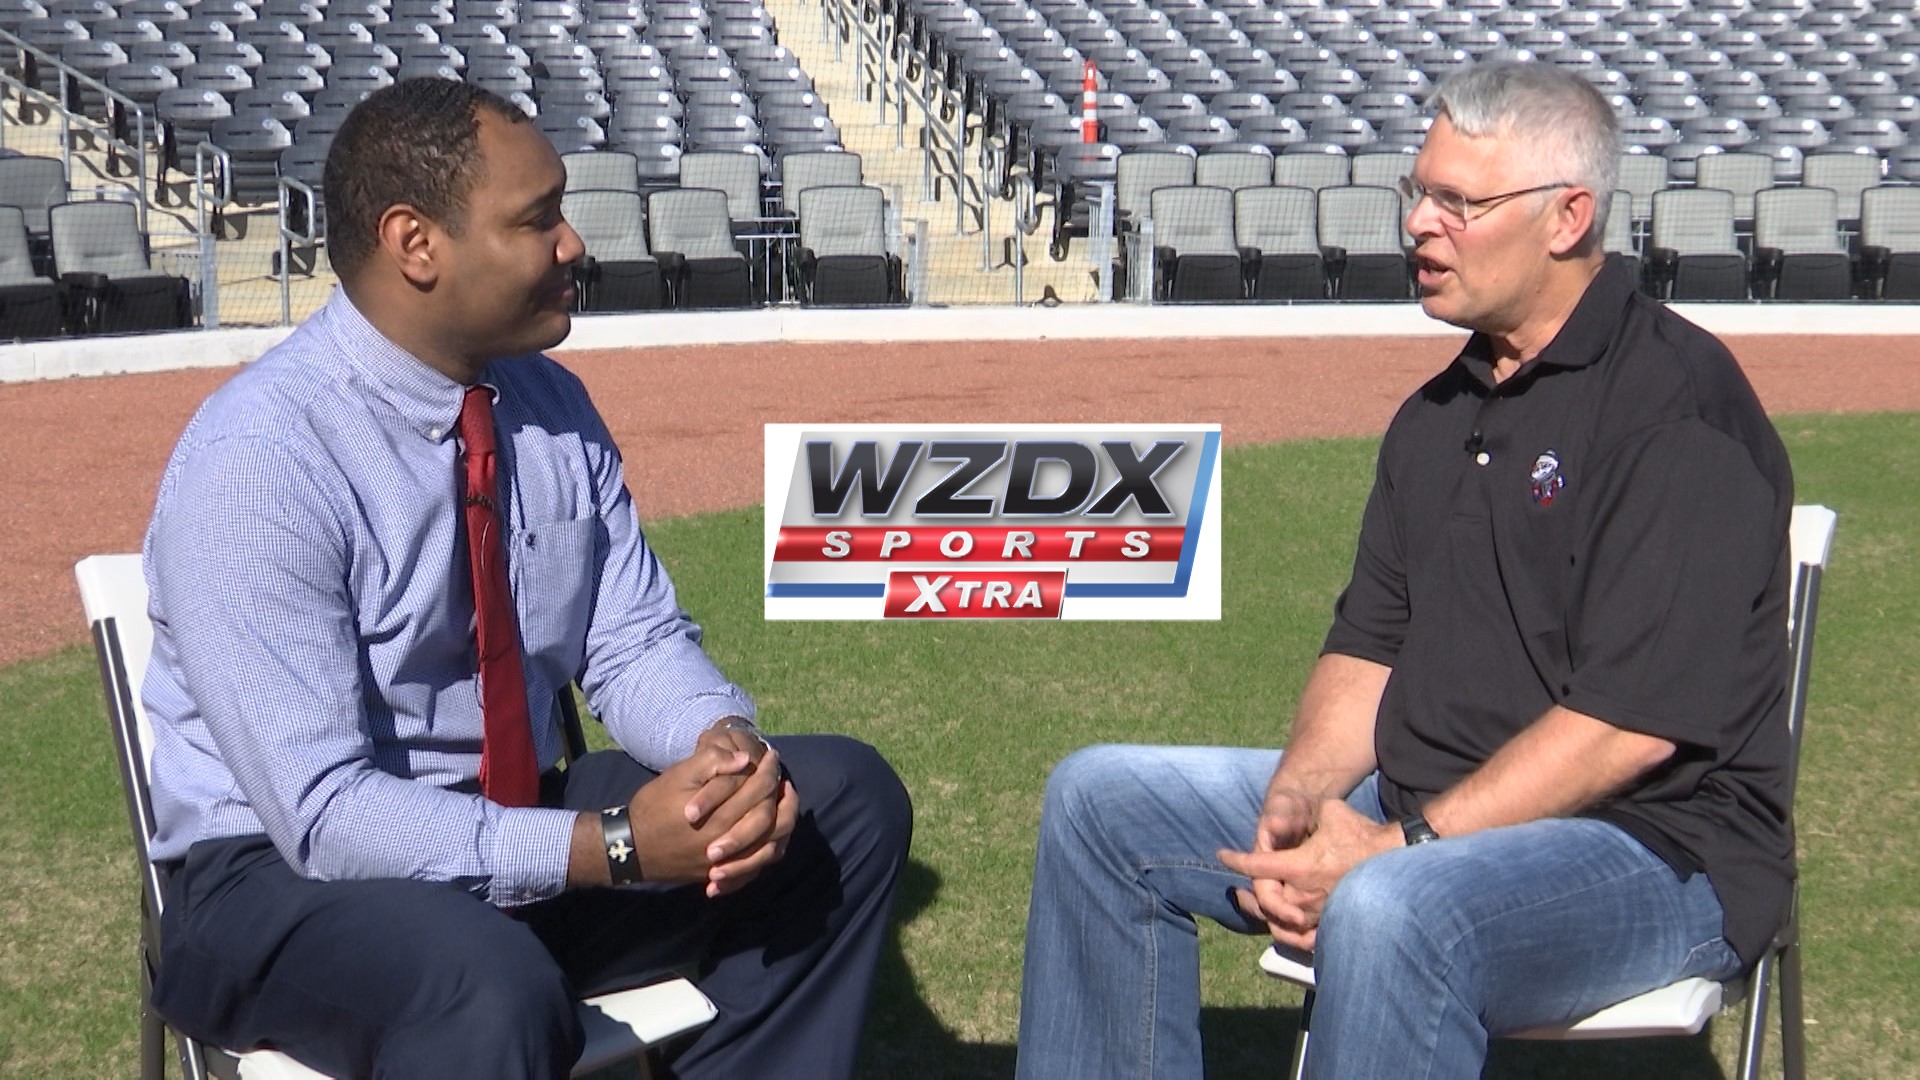 This week, the L.A. Angels named former MLB all-star Jay Bell as the first manager of the Rocket City Trash Pandas baseball team. WZDX Sports Director Mo Carter caught up with Bell for another edition of Sunday Sitdown on WZDX Sports XTRA.